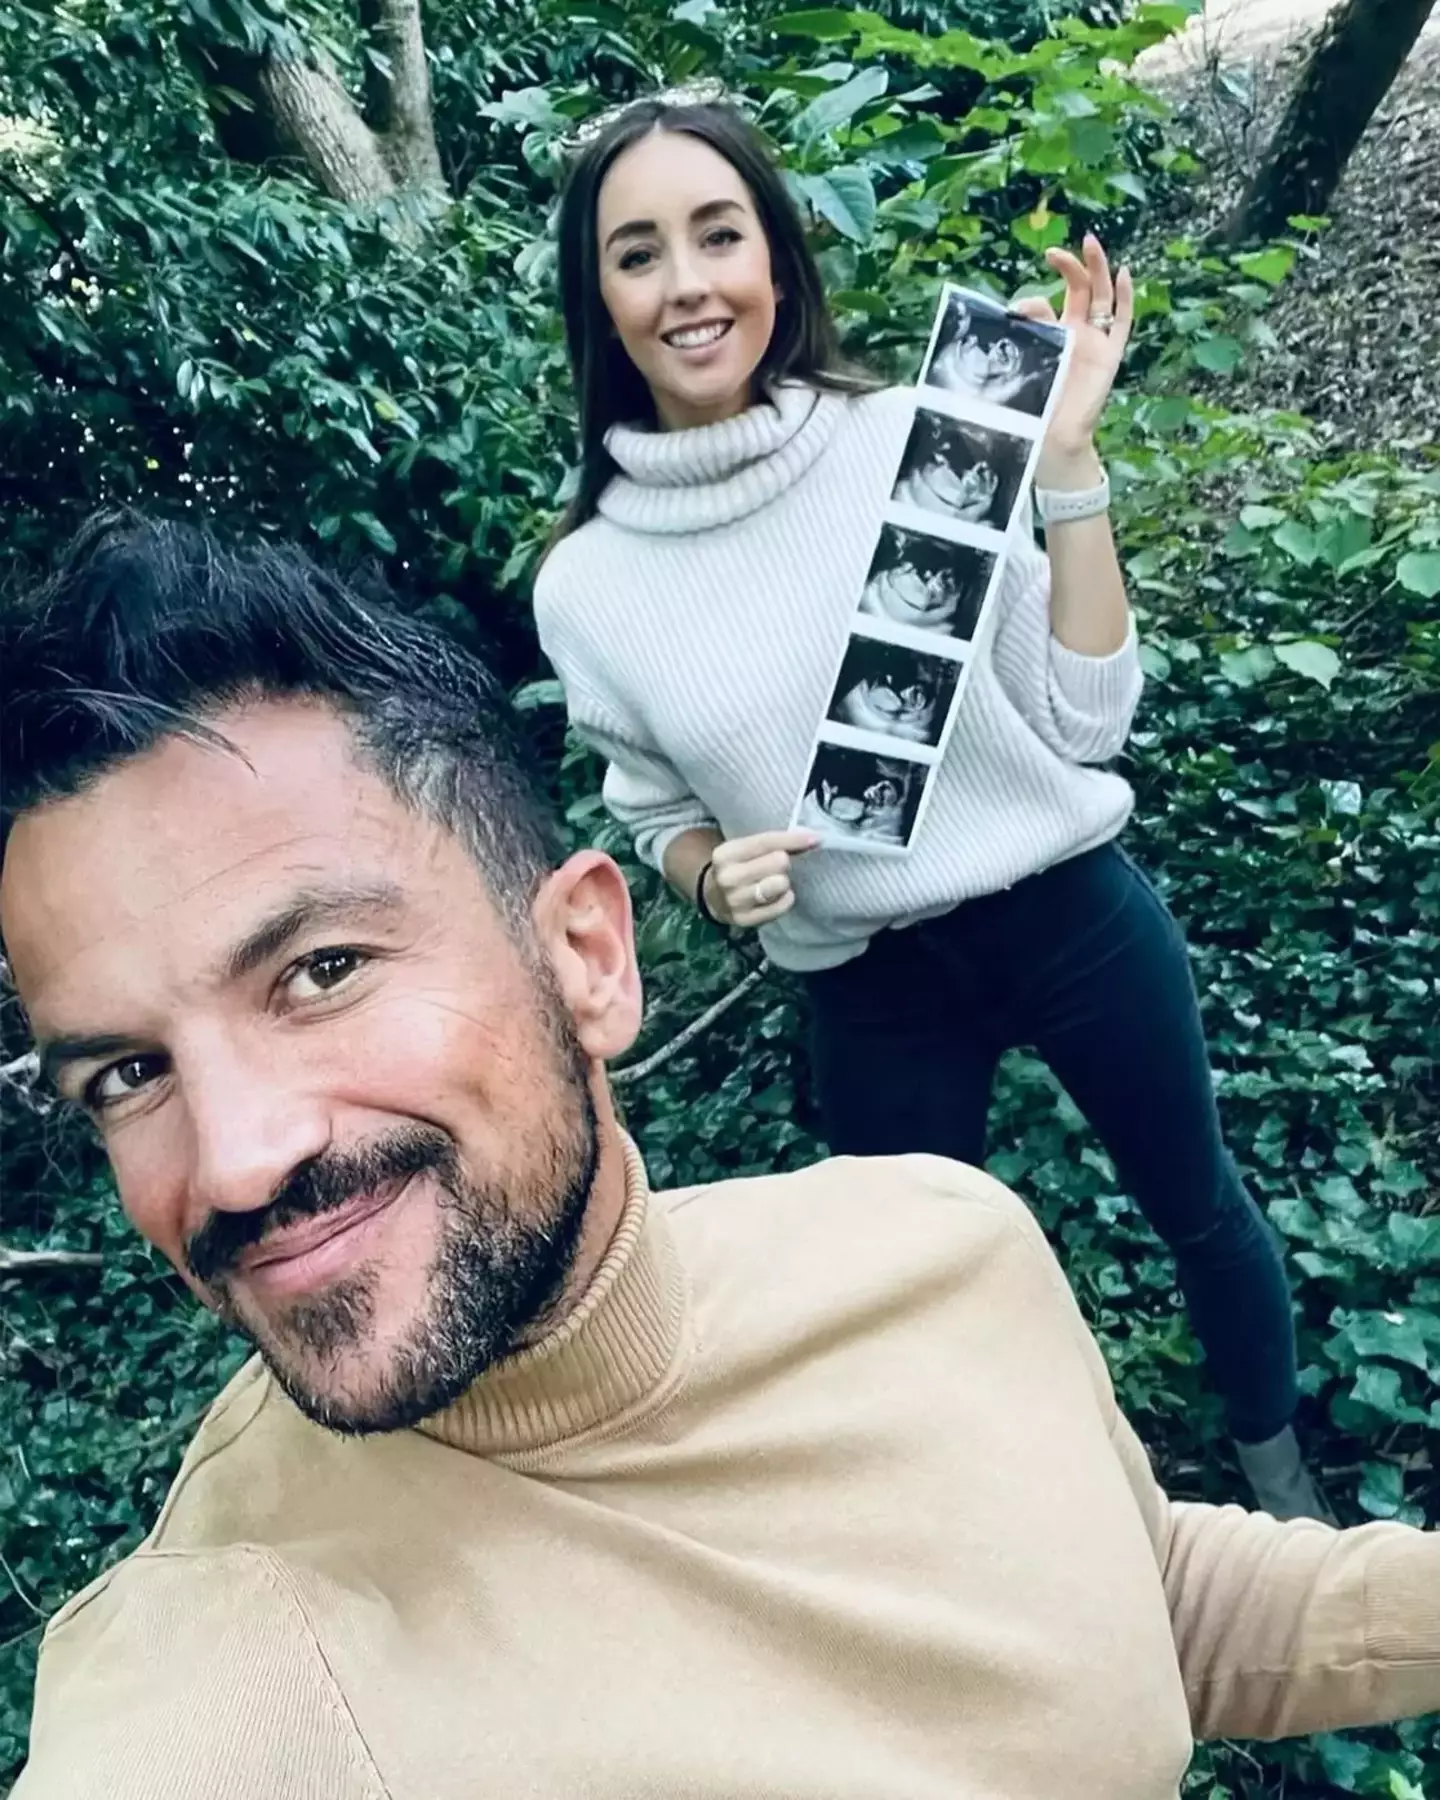 Peter Andre and wife Emily MacDonagh announced exciting news on Instagram.